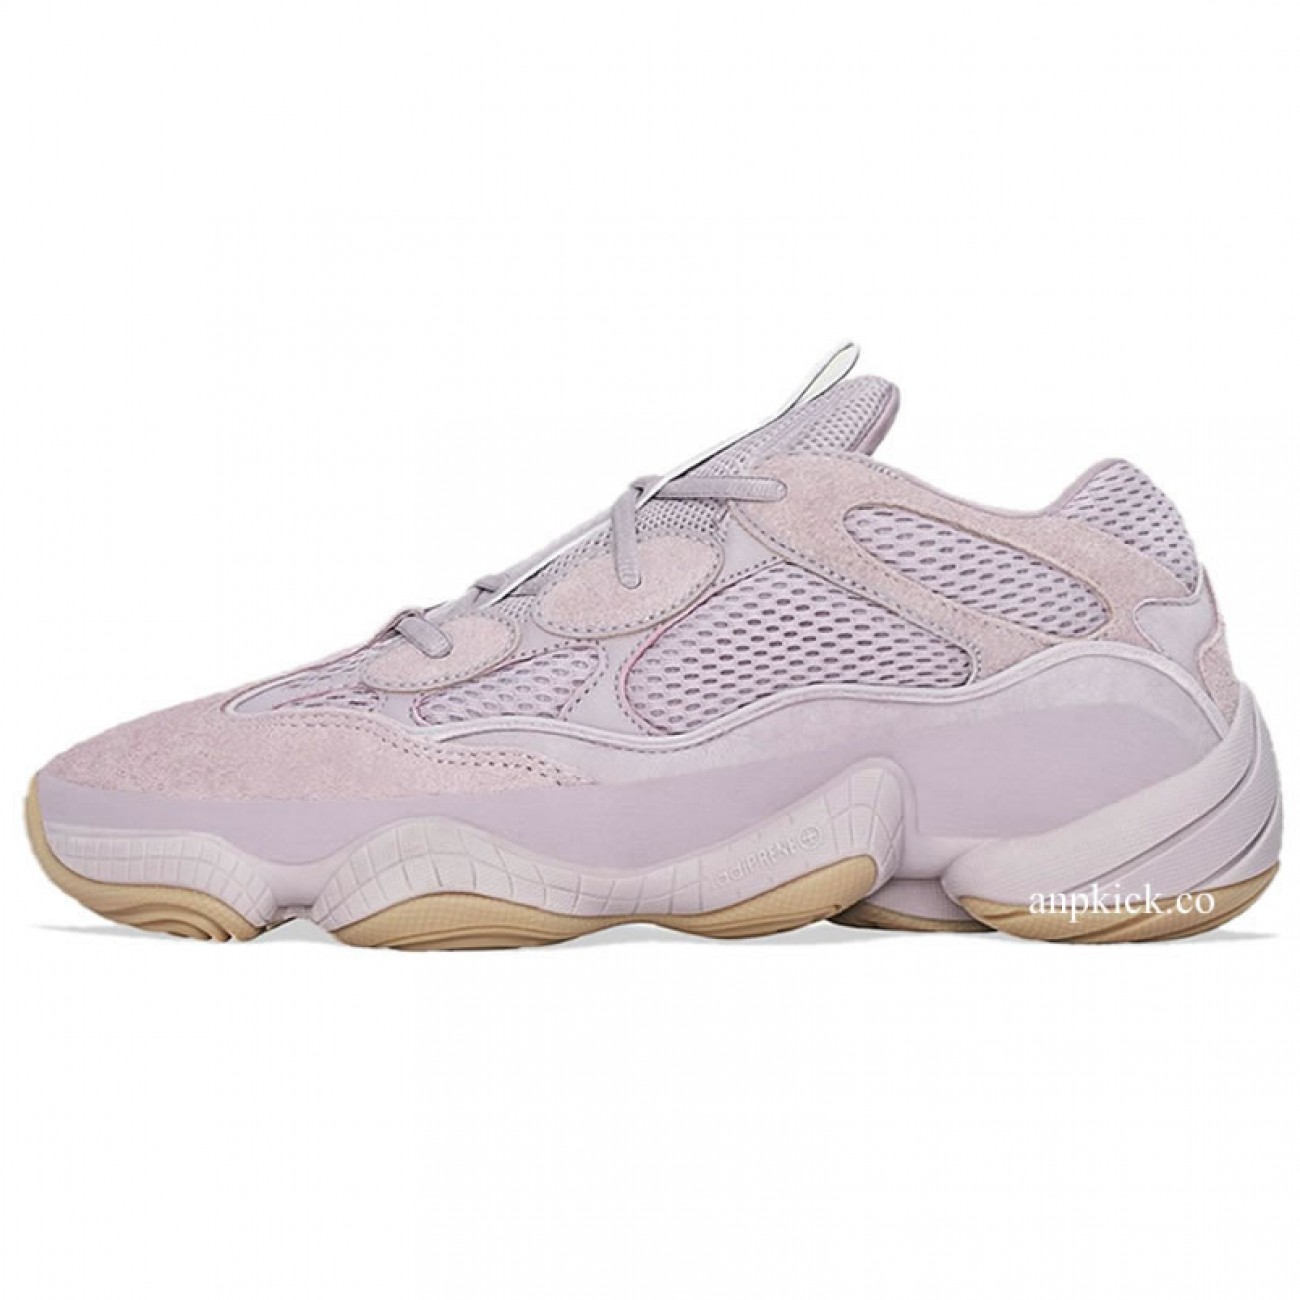 adidas Yeezy 500 "Soft Vision" Pink Retail Price Order On Feet Release Date FW2656